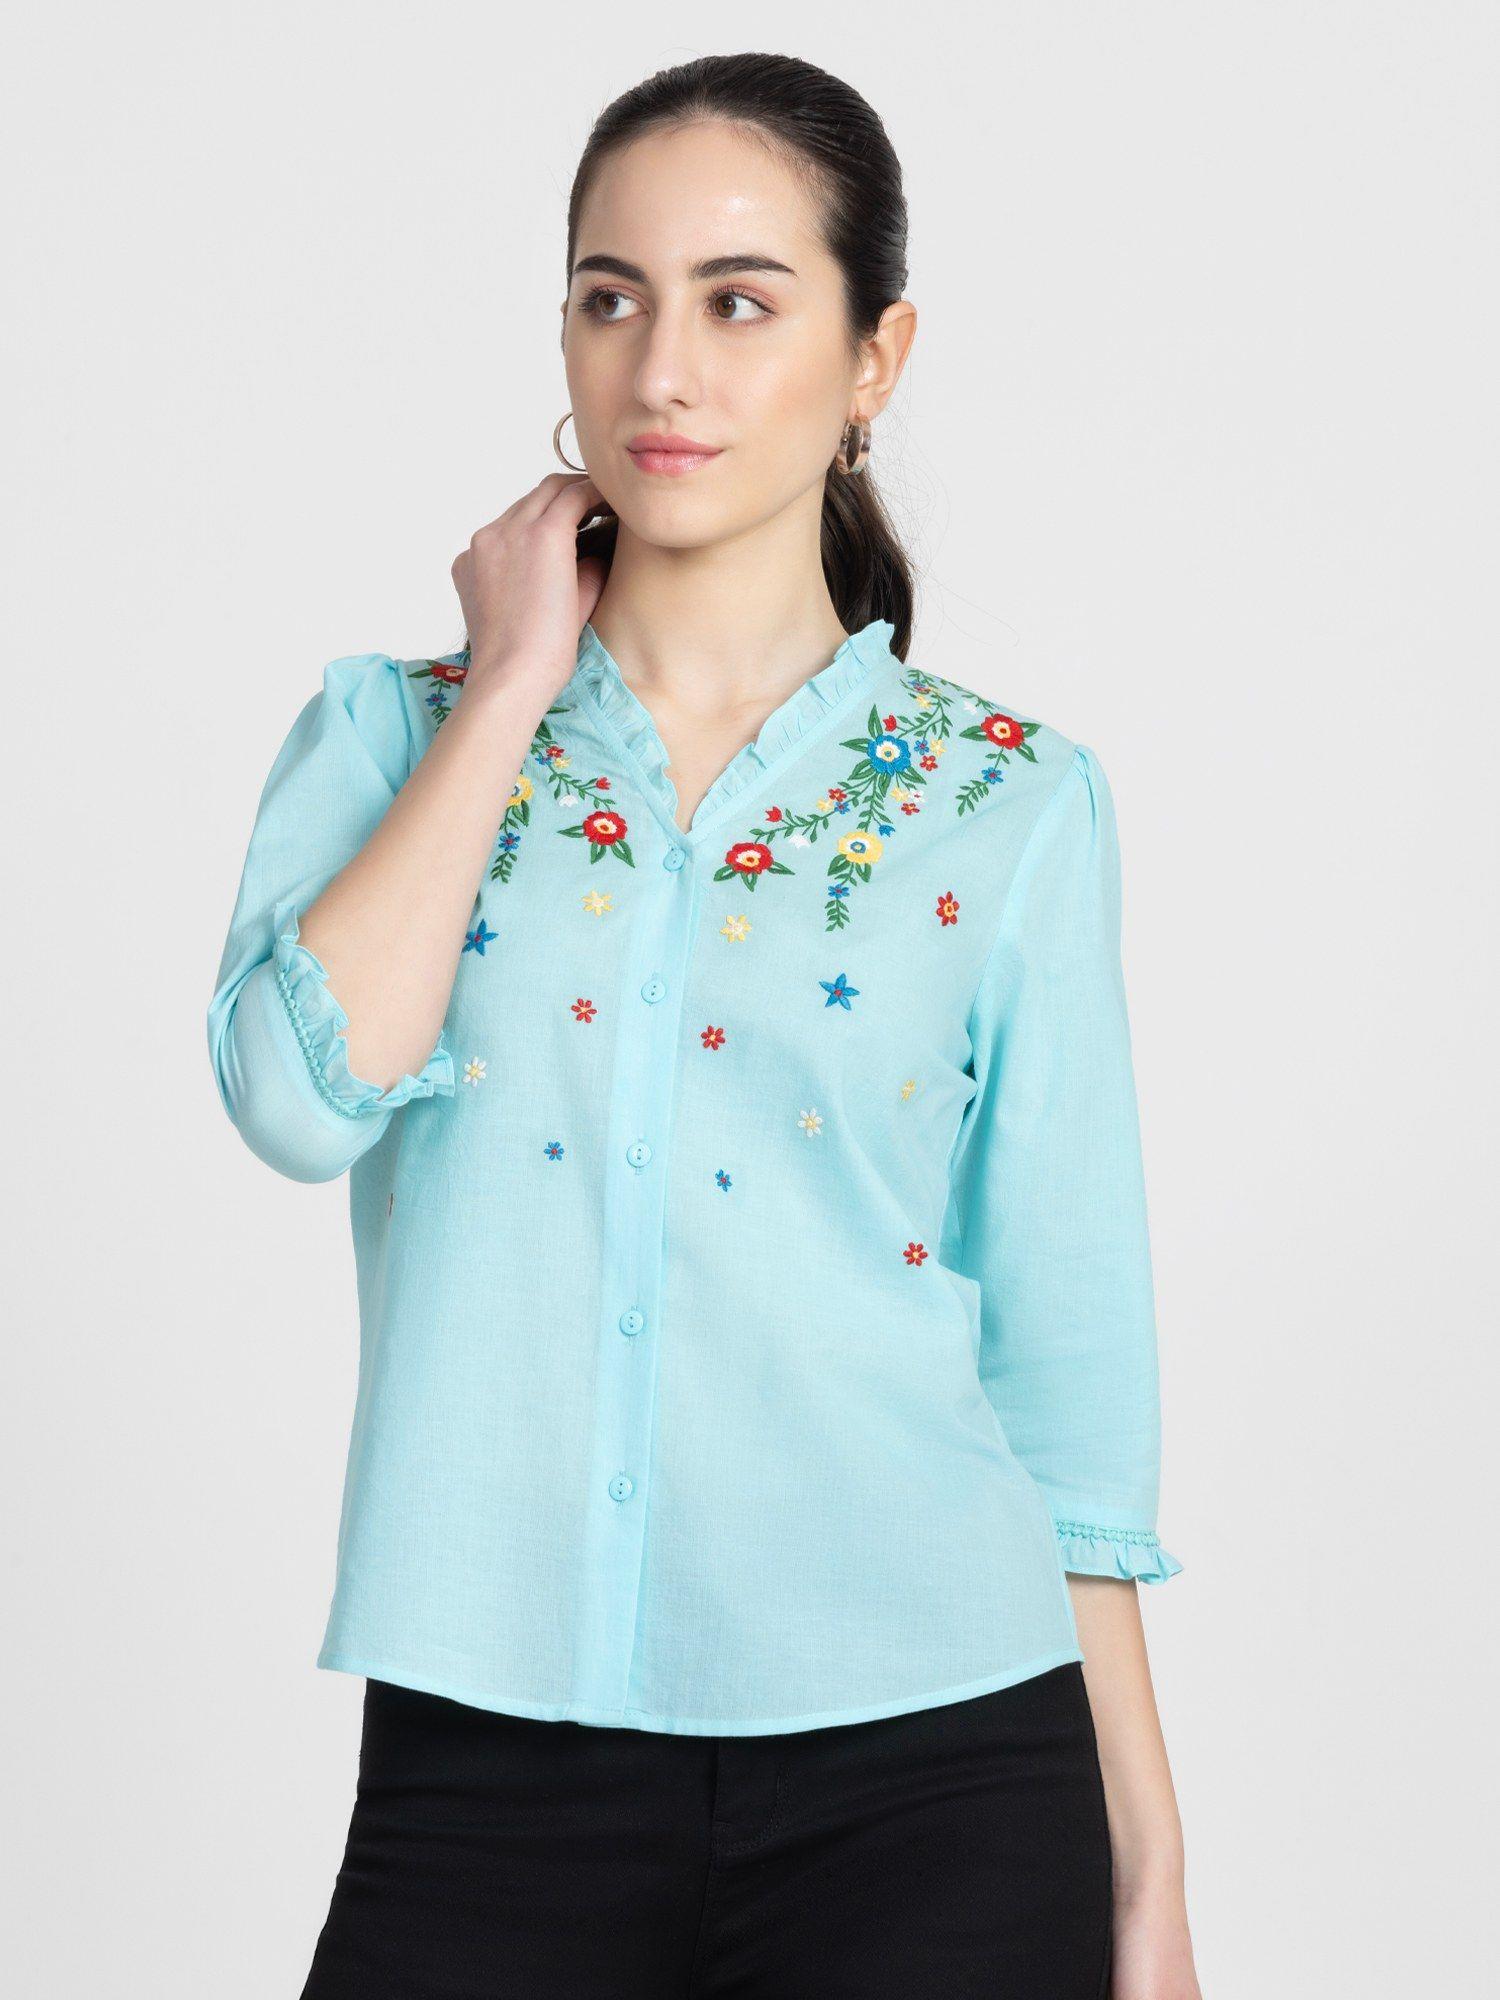 v-neck blue embroidered three-quarter sleeves casual top for women